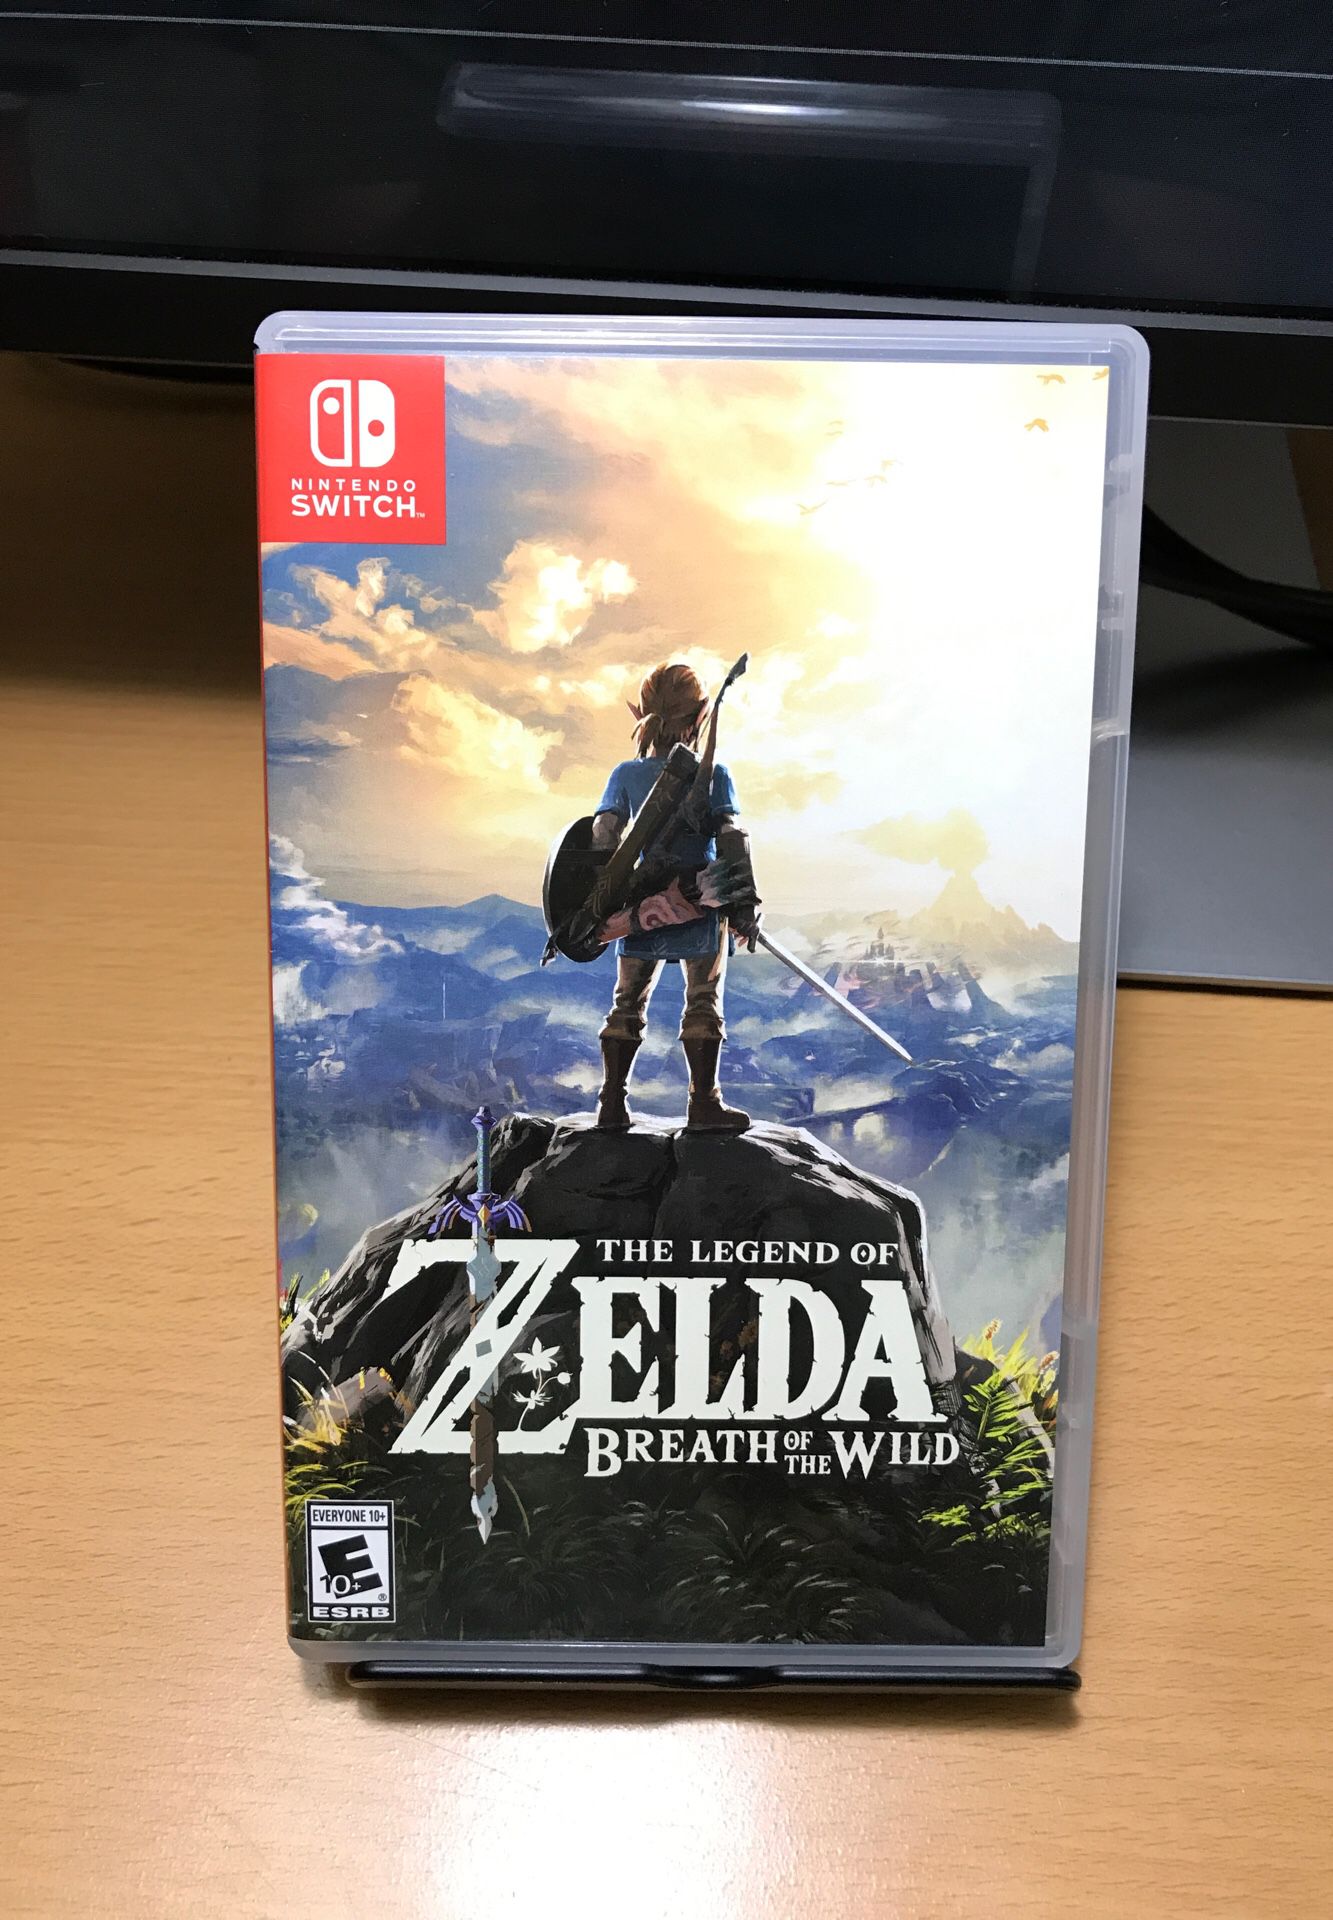 The Legend of Zelda : Breath of the Wild $ or trade